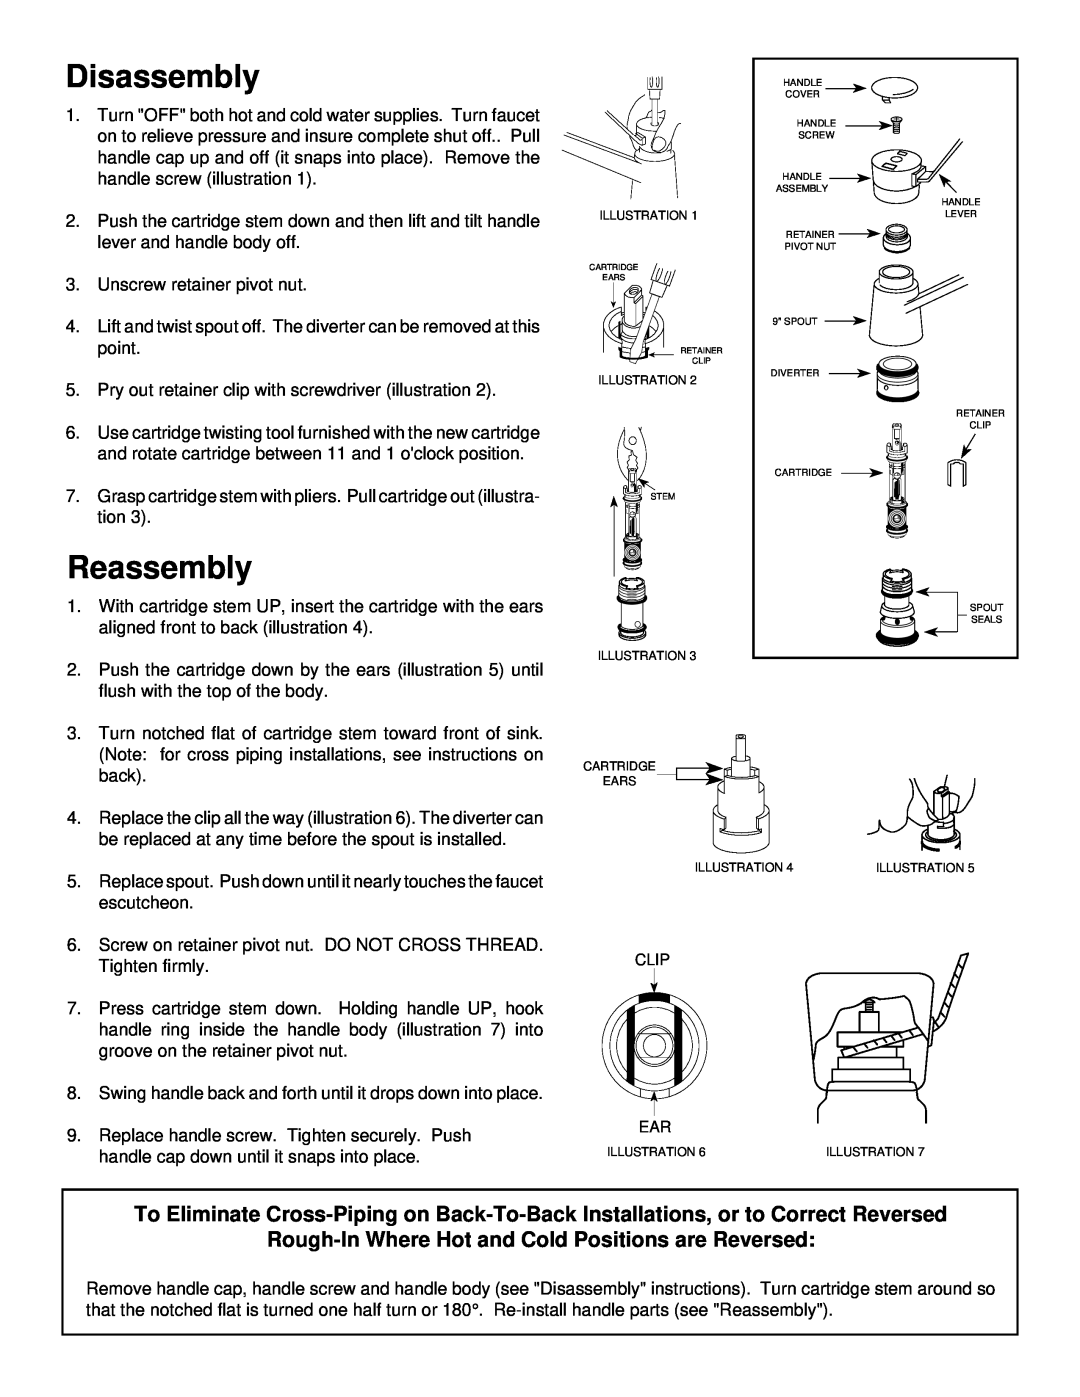 Moen 7300, 8700 installation instructions Disassembly, Reassembly, Rough-InWhere Hot and Cold Positions are Reversed 